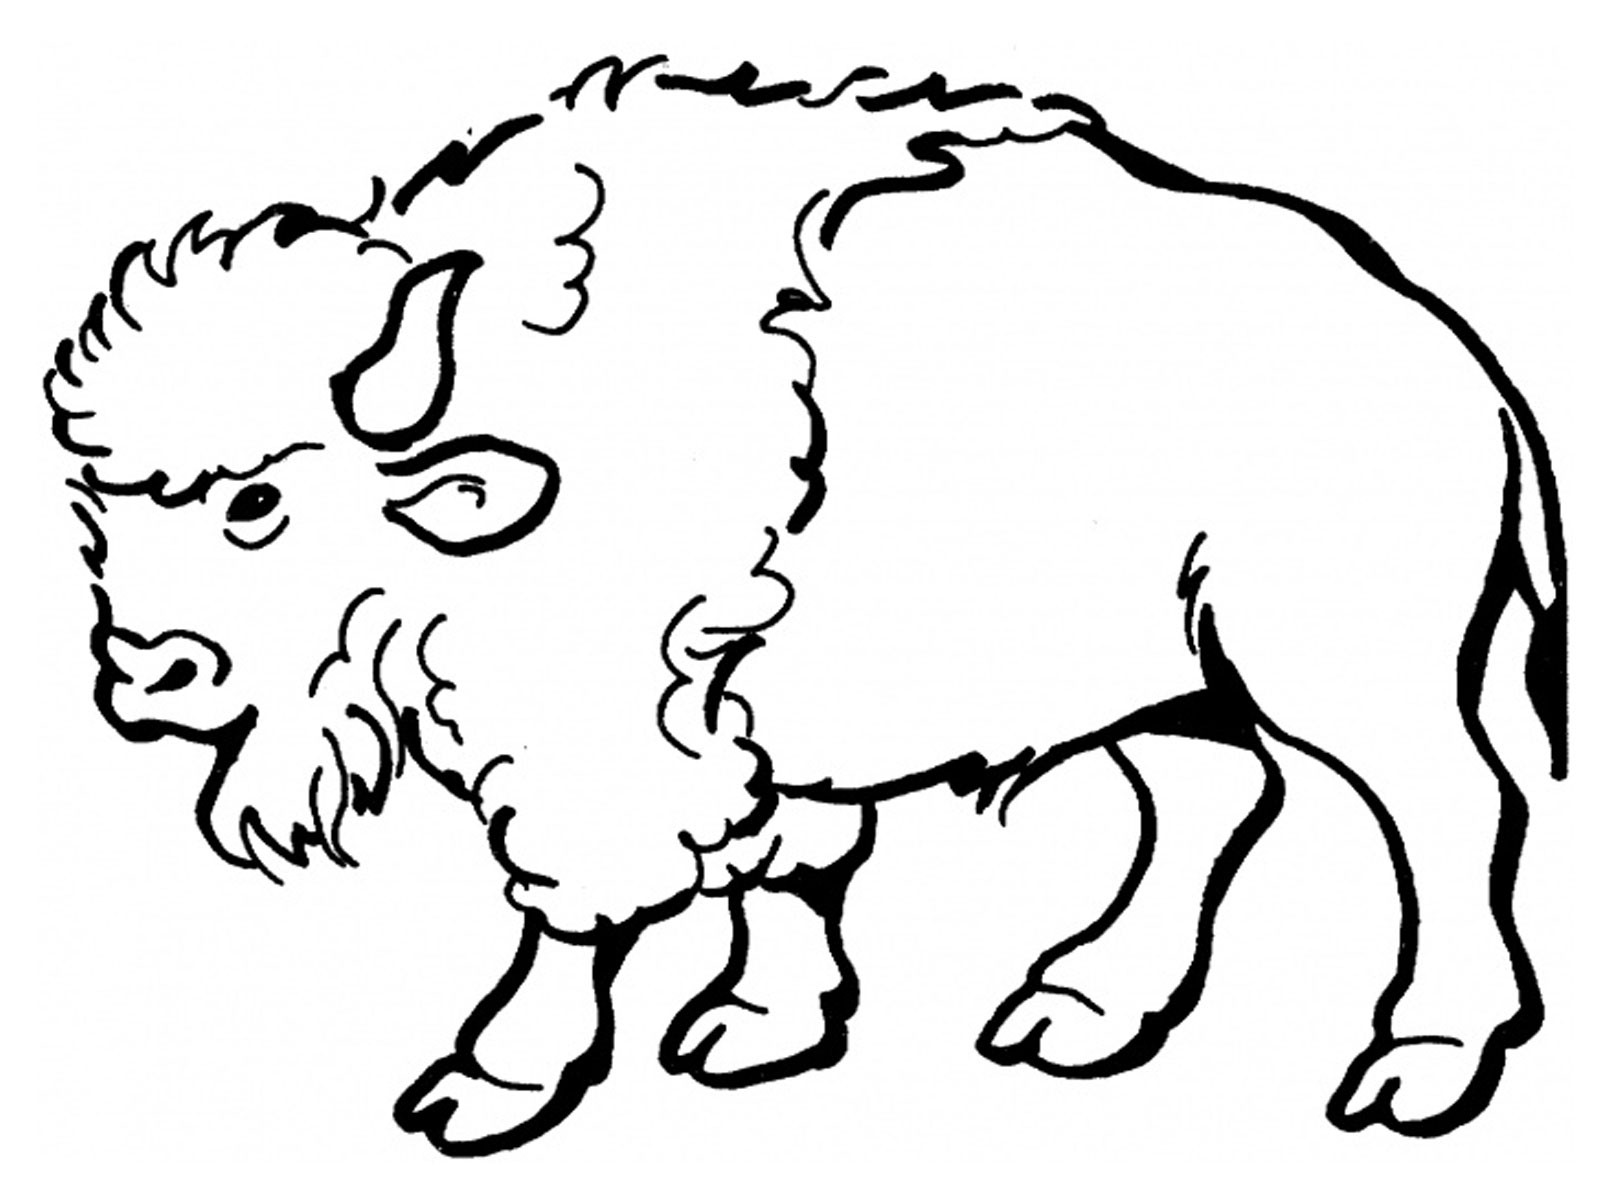 Coloring page: Bison (Animals) #1190 - Free Printable Coloring Pages